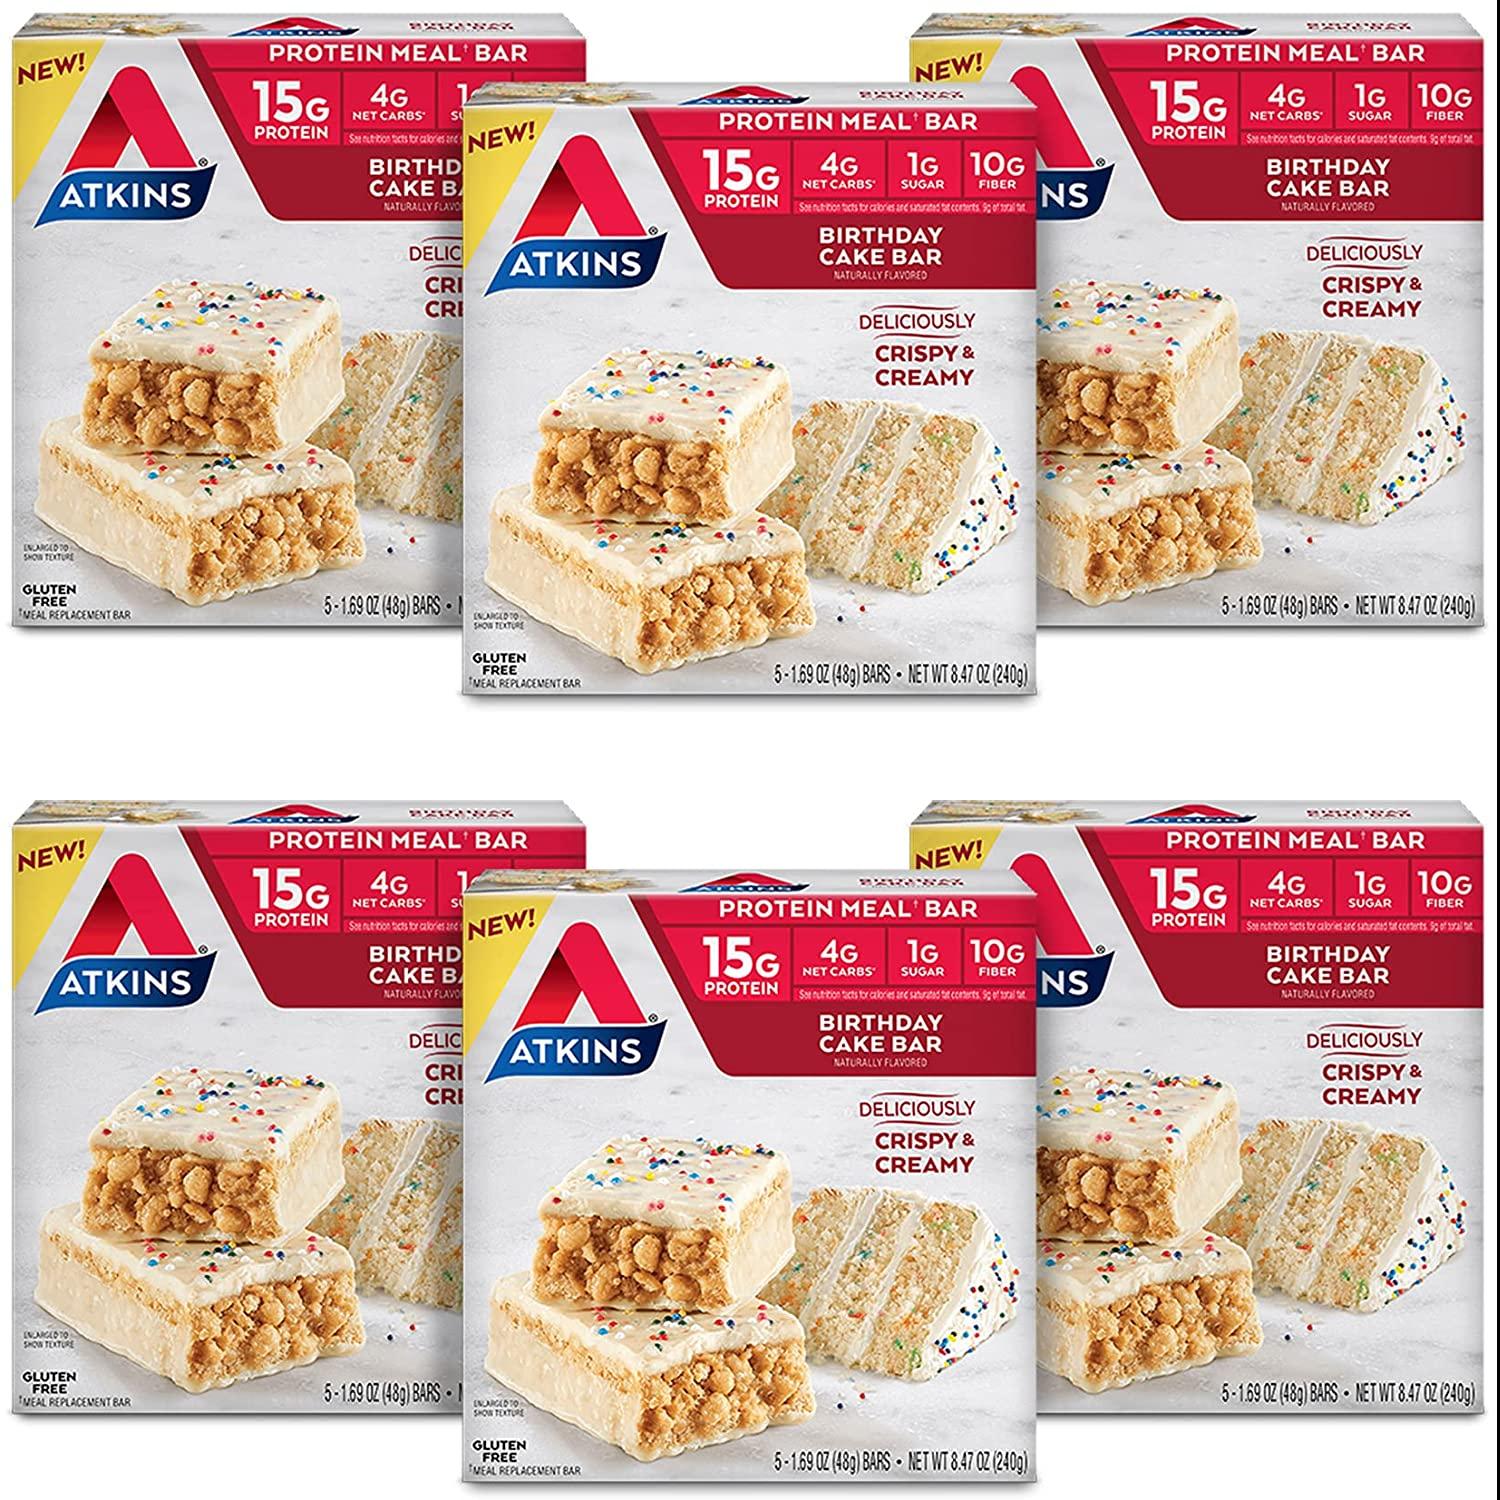 30 Atkins Birthday Cake Protein Meal Bars for $19.99 Shipped